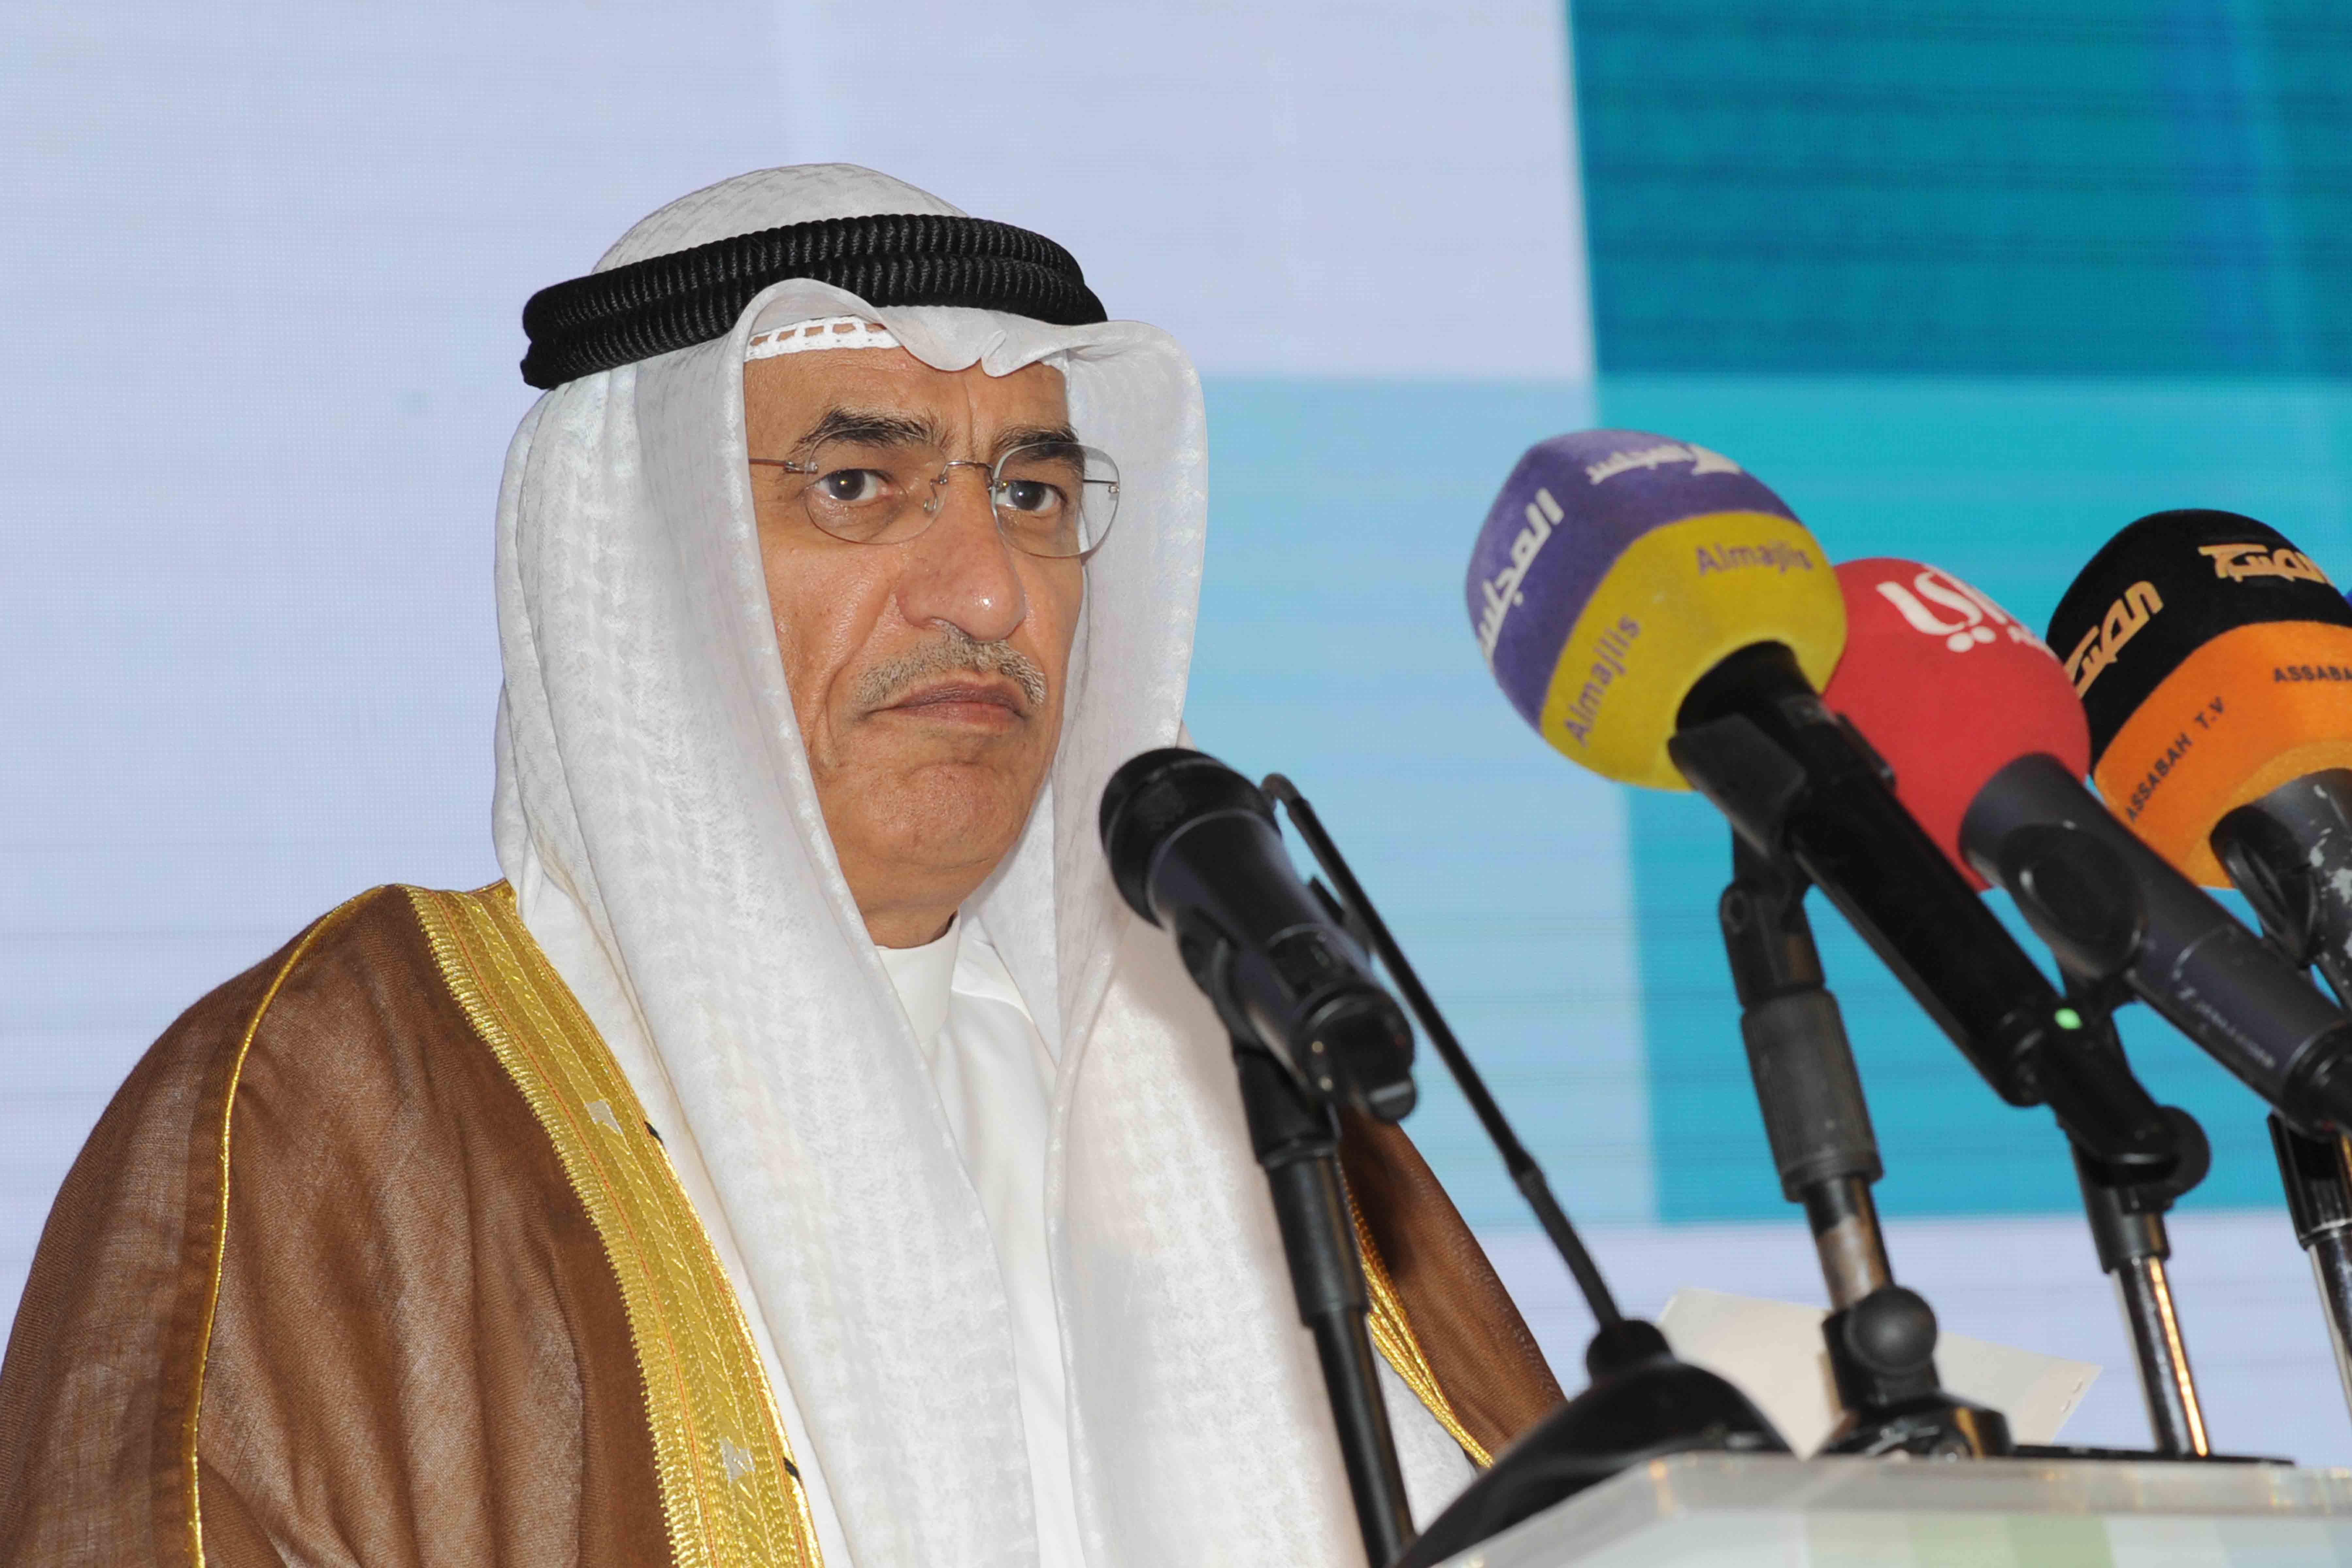 Minister of Oil and Minister of Electricity and Water Bakheet Al-Rashidi addresses the 4th Arab Forum for Renewable Energy and Energy Efficiency